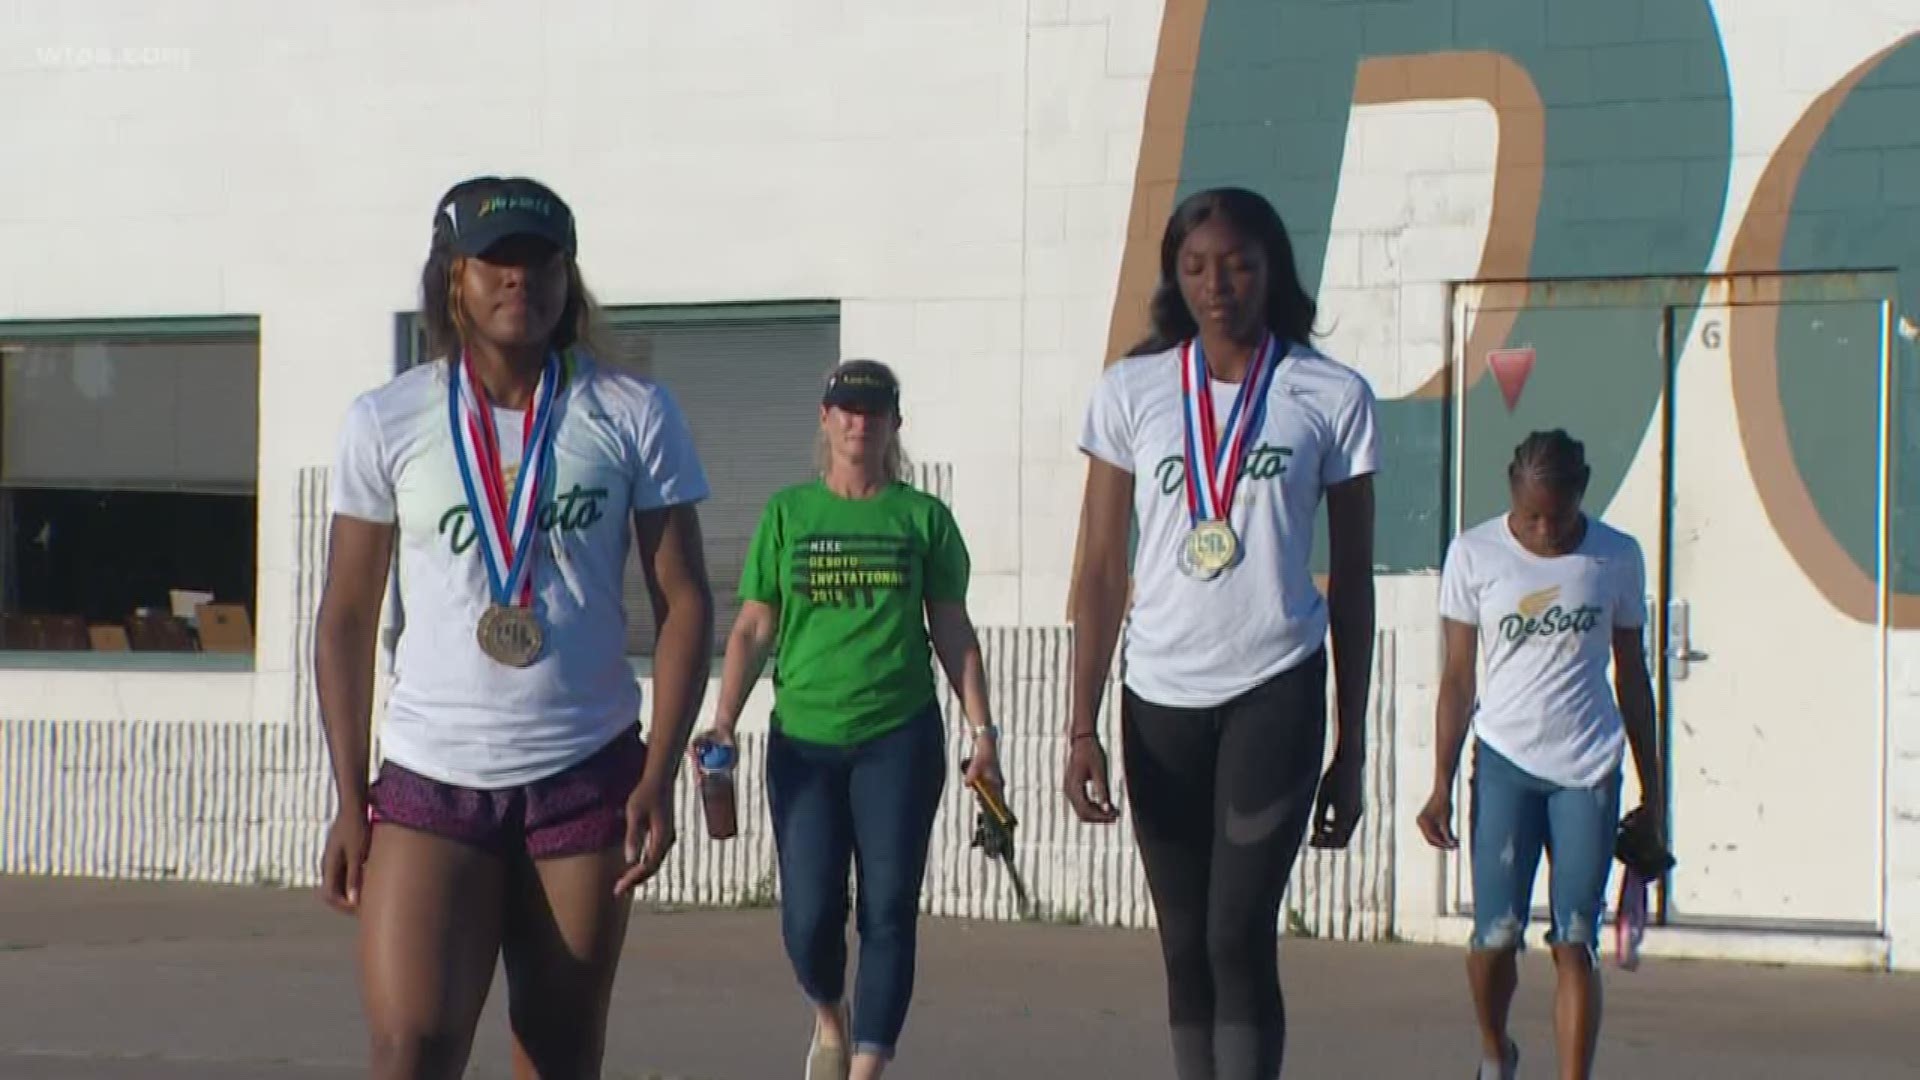 They're the fastest high school relay team in the nation.